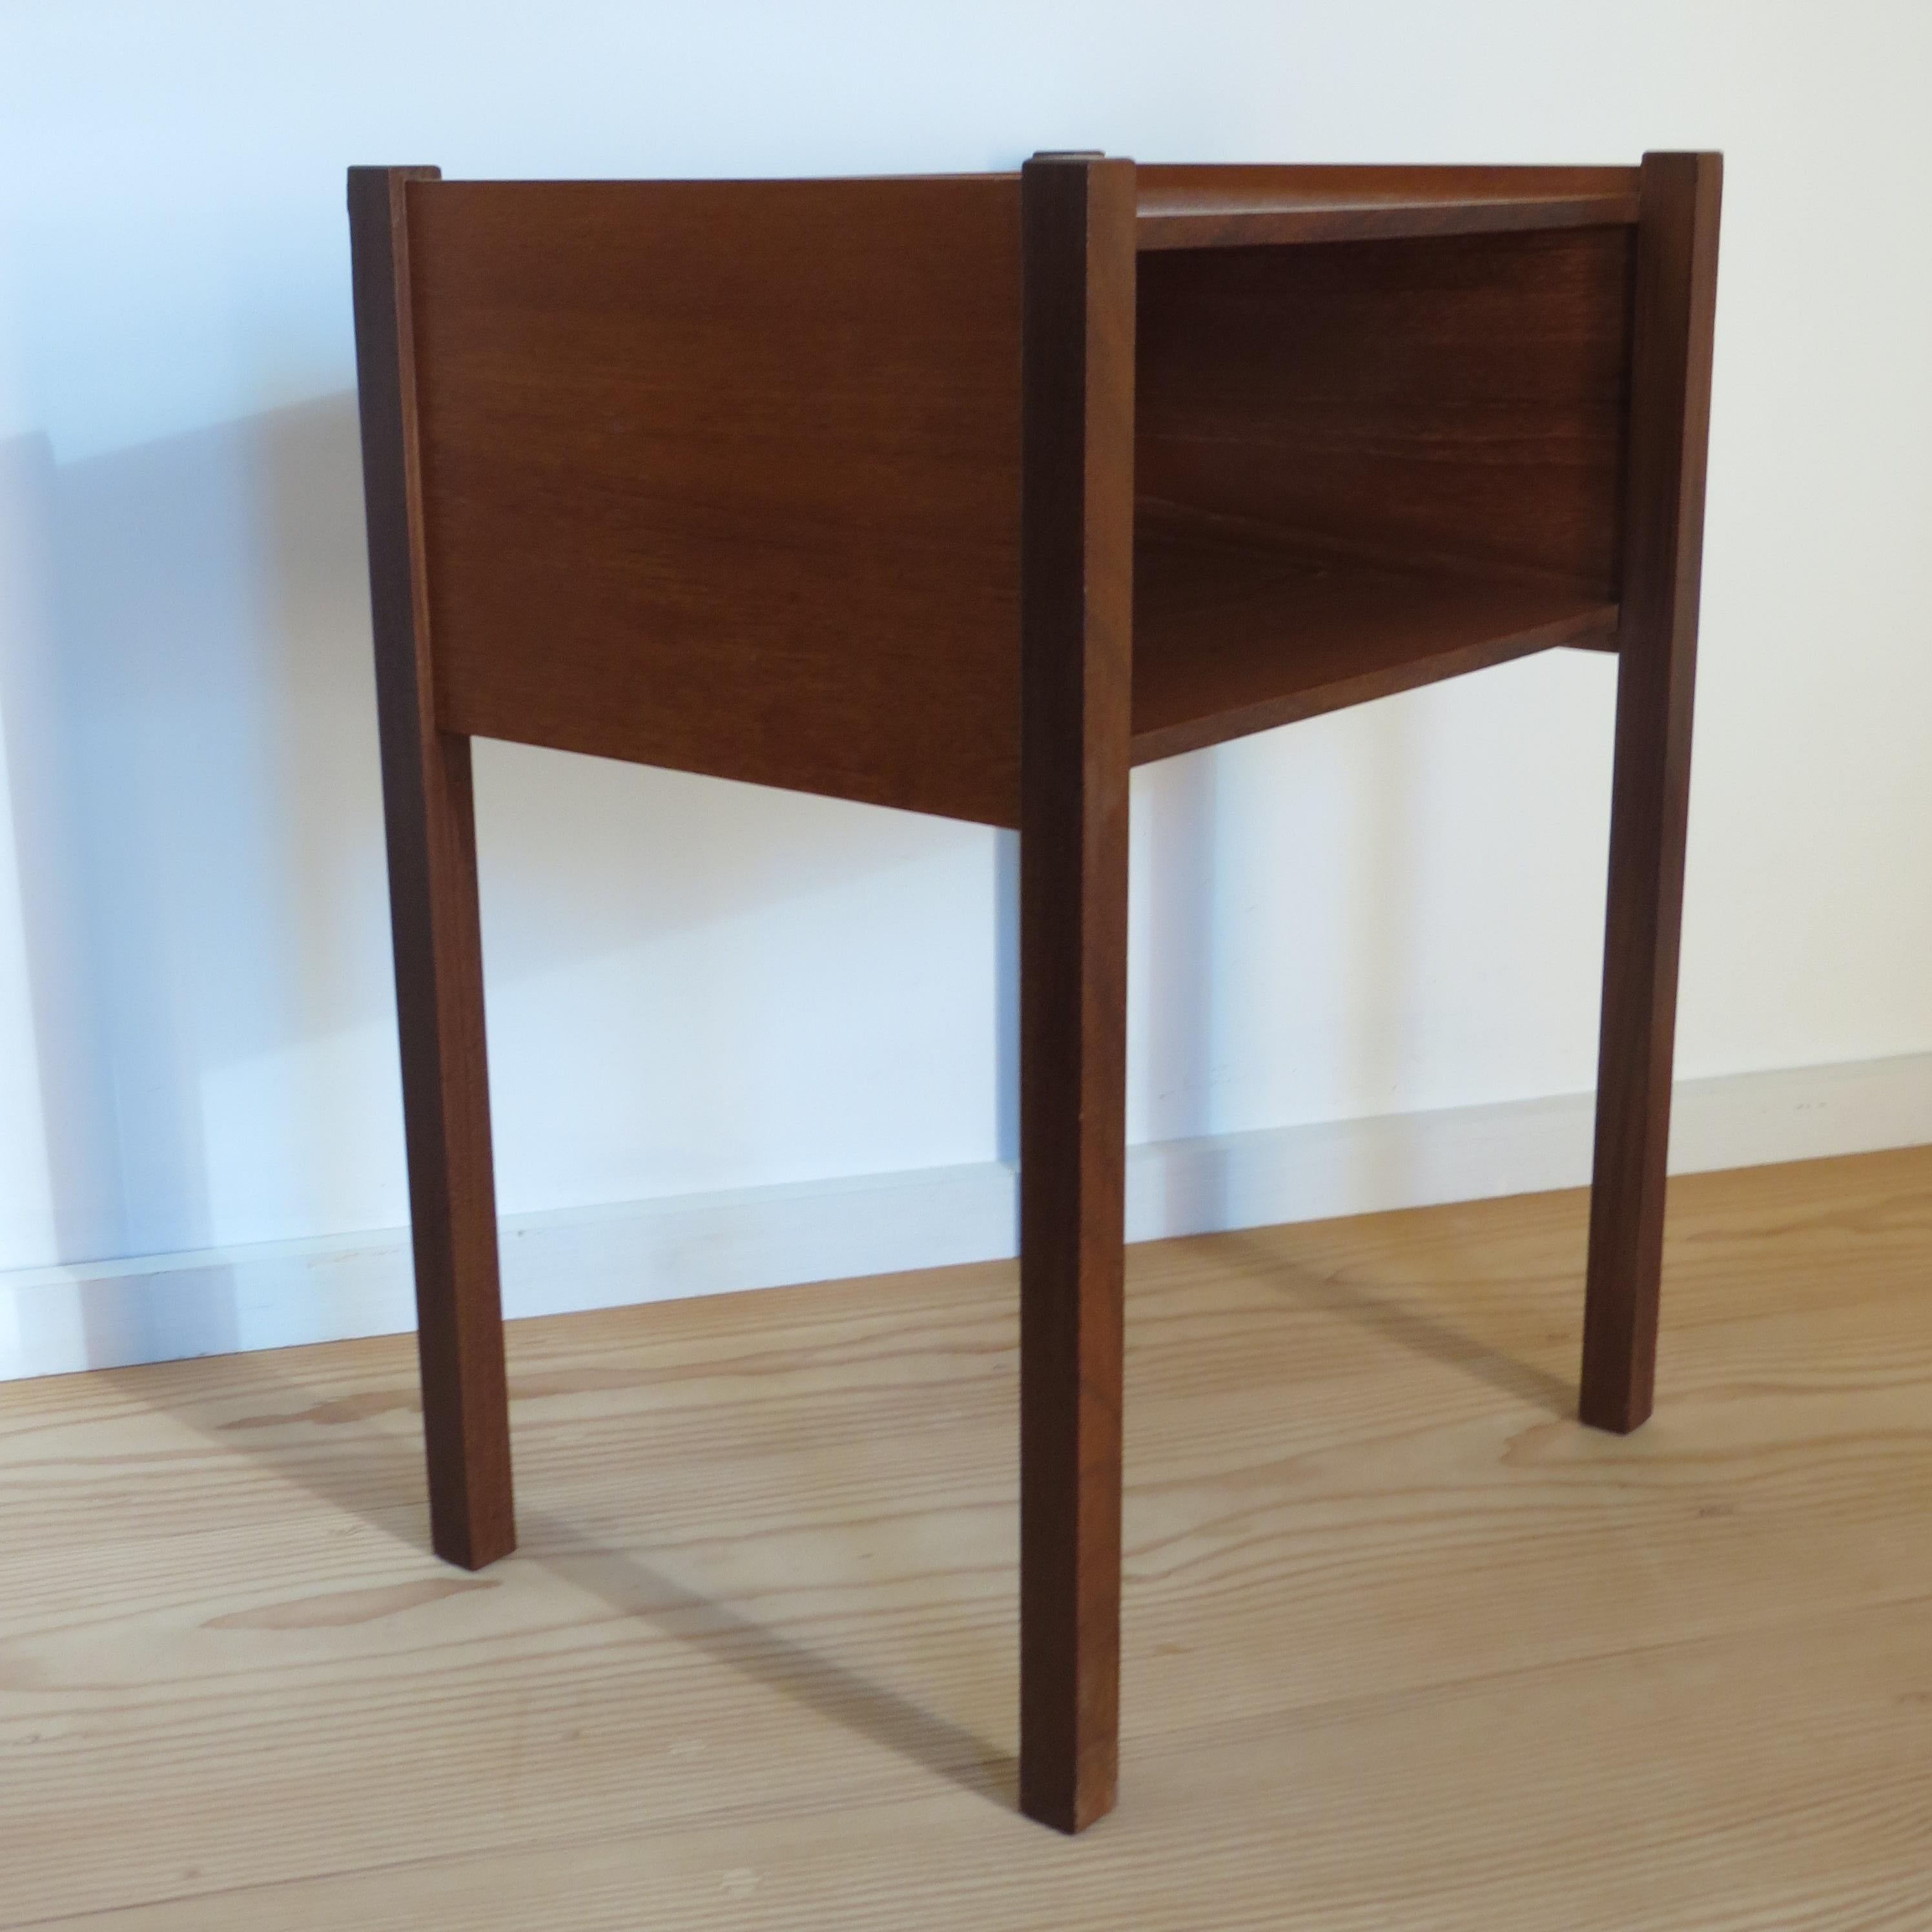 Wonderful night stand bedside table from the 1960s.

Made from solid Afrormosia legs, with Teak top and shelf.   Very good quality, elemental design.

Good vintage condition.

Shelf gap measures 16.5cm tall 41.5cm wide

ST1516.